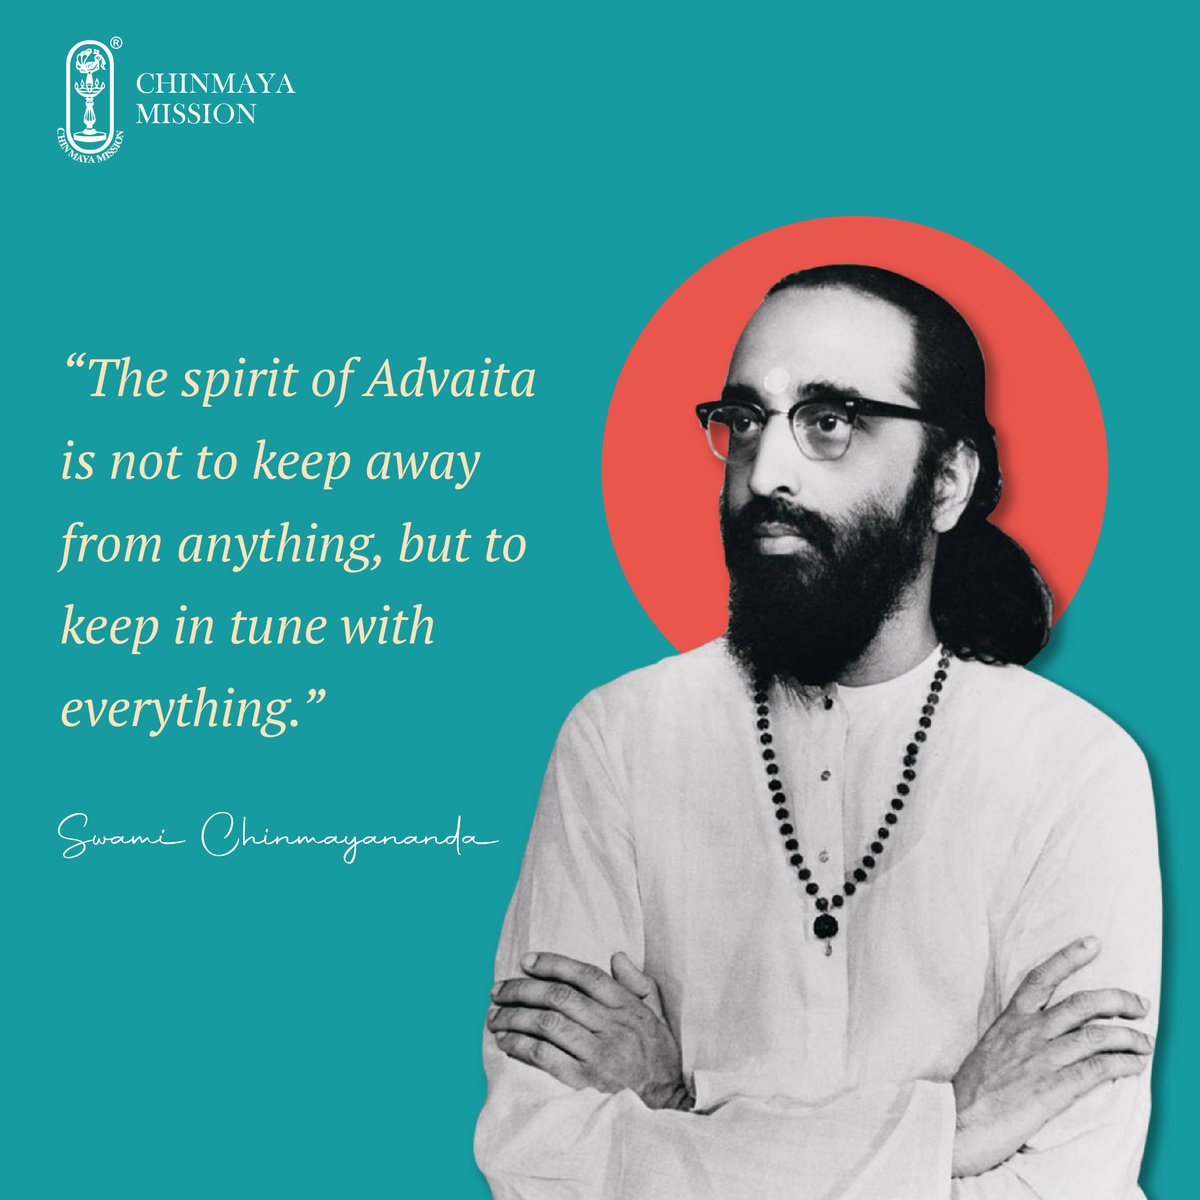 As Pujya Gurudev said, it is up to us to embrace the journey and pay mindful heed to every note, moment and situation in its own merit. 

#ChinmayaMission #CCMT #SwamiChinmayananda #SwamiChinmayanandaQuotes #PujyaGurudev #Spirituality #SpiritualAwakening #DailyPositivity